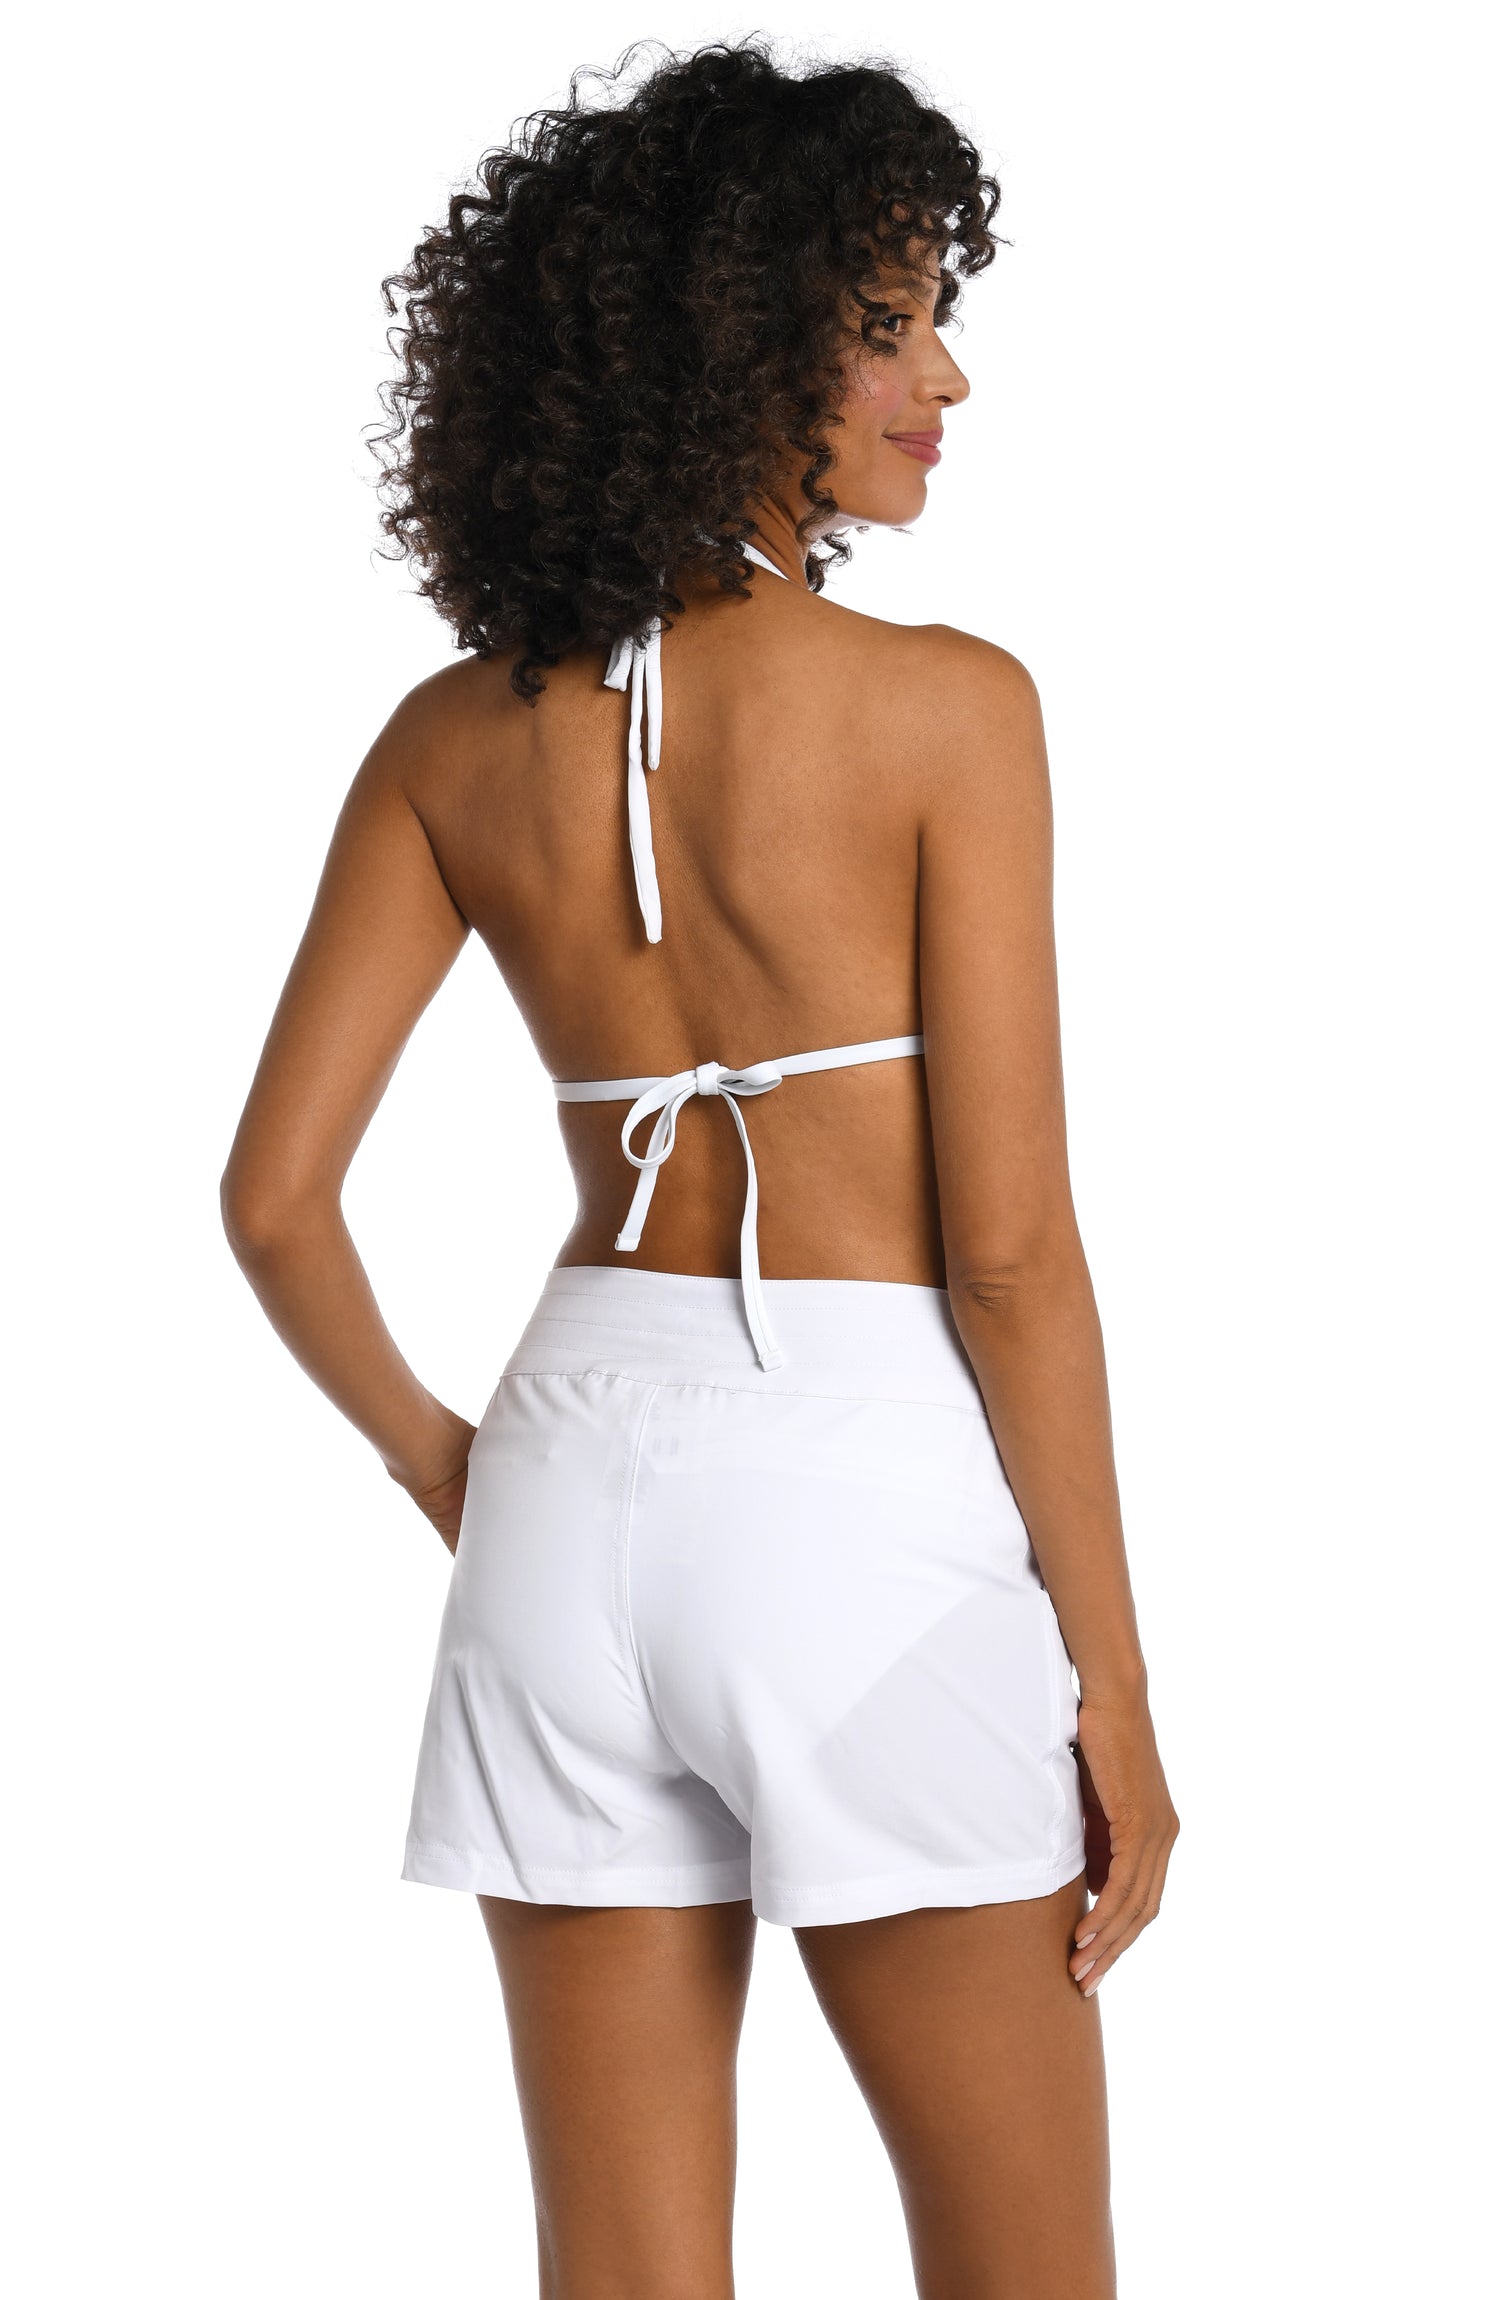 Model is wearing a white colored board short swimsuit from our All Aboard collection.